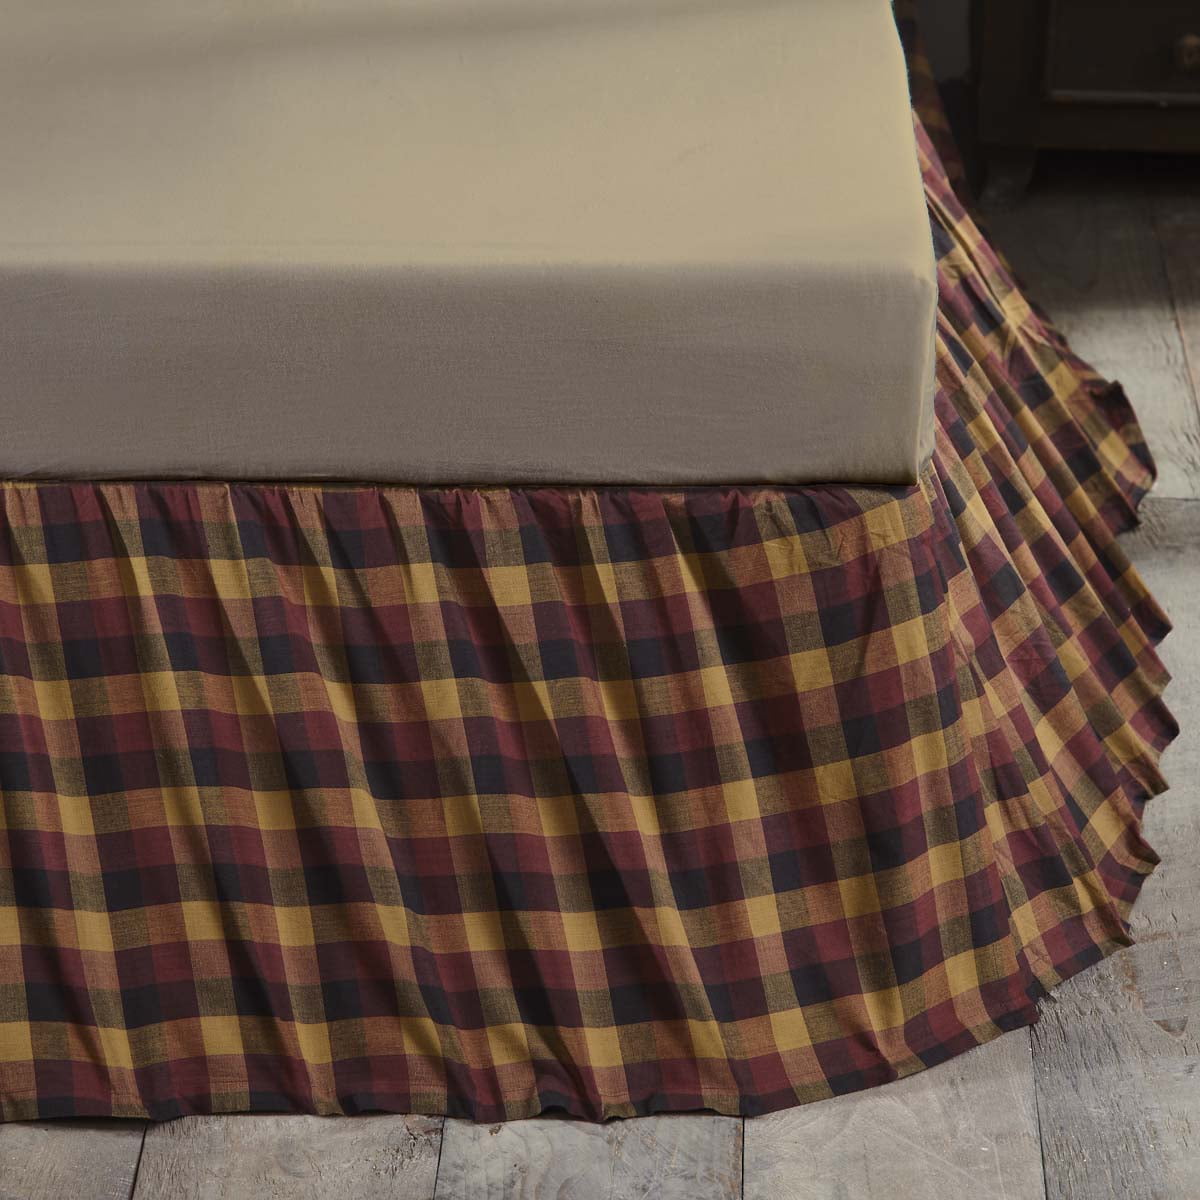 King Queen Twin Cotton Plaid Bed Skirt Dust Ruffle VHC Primitive 